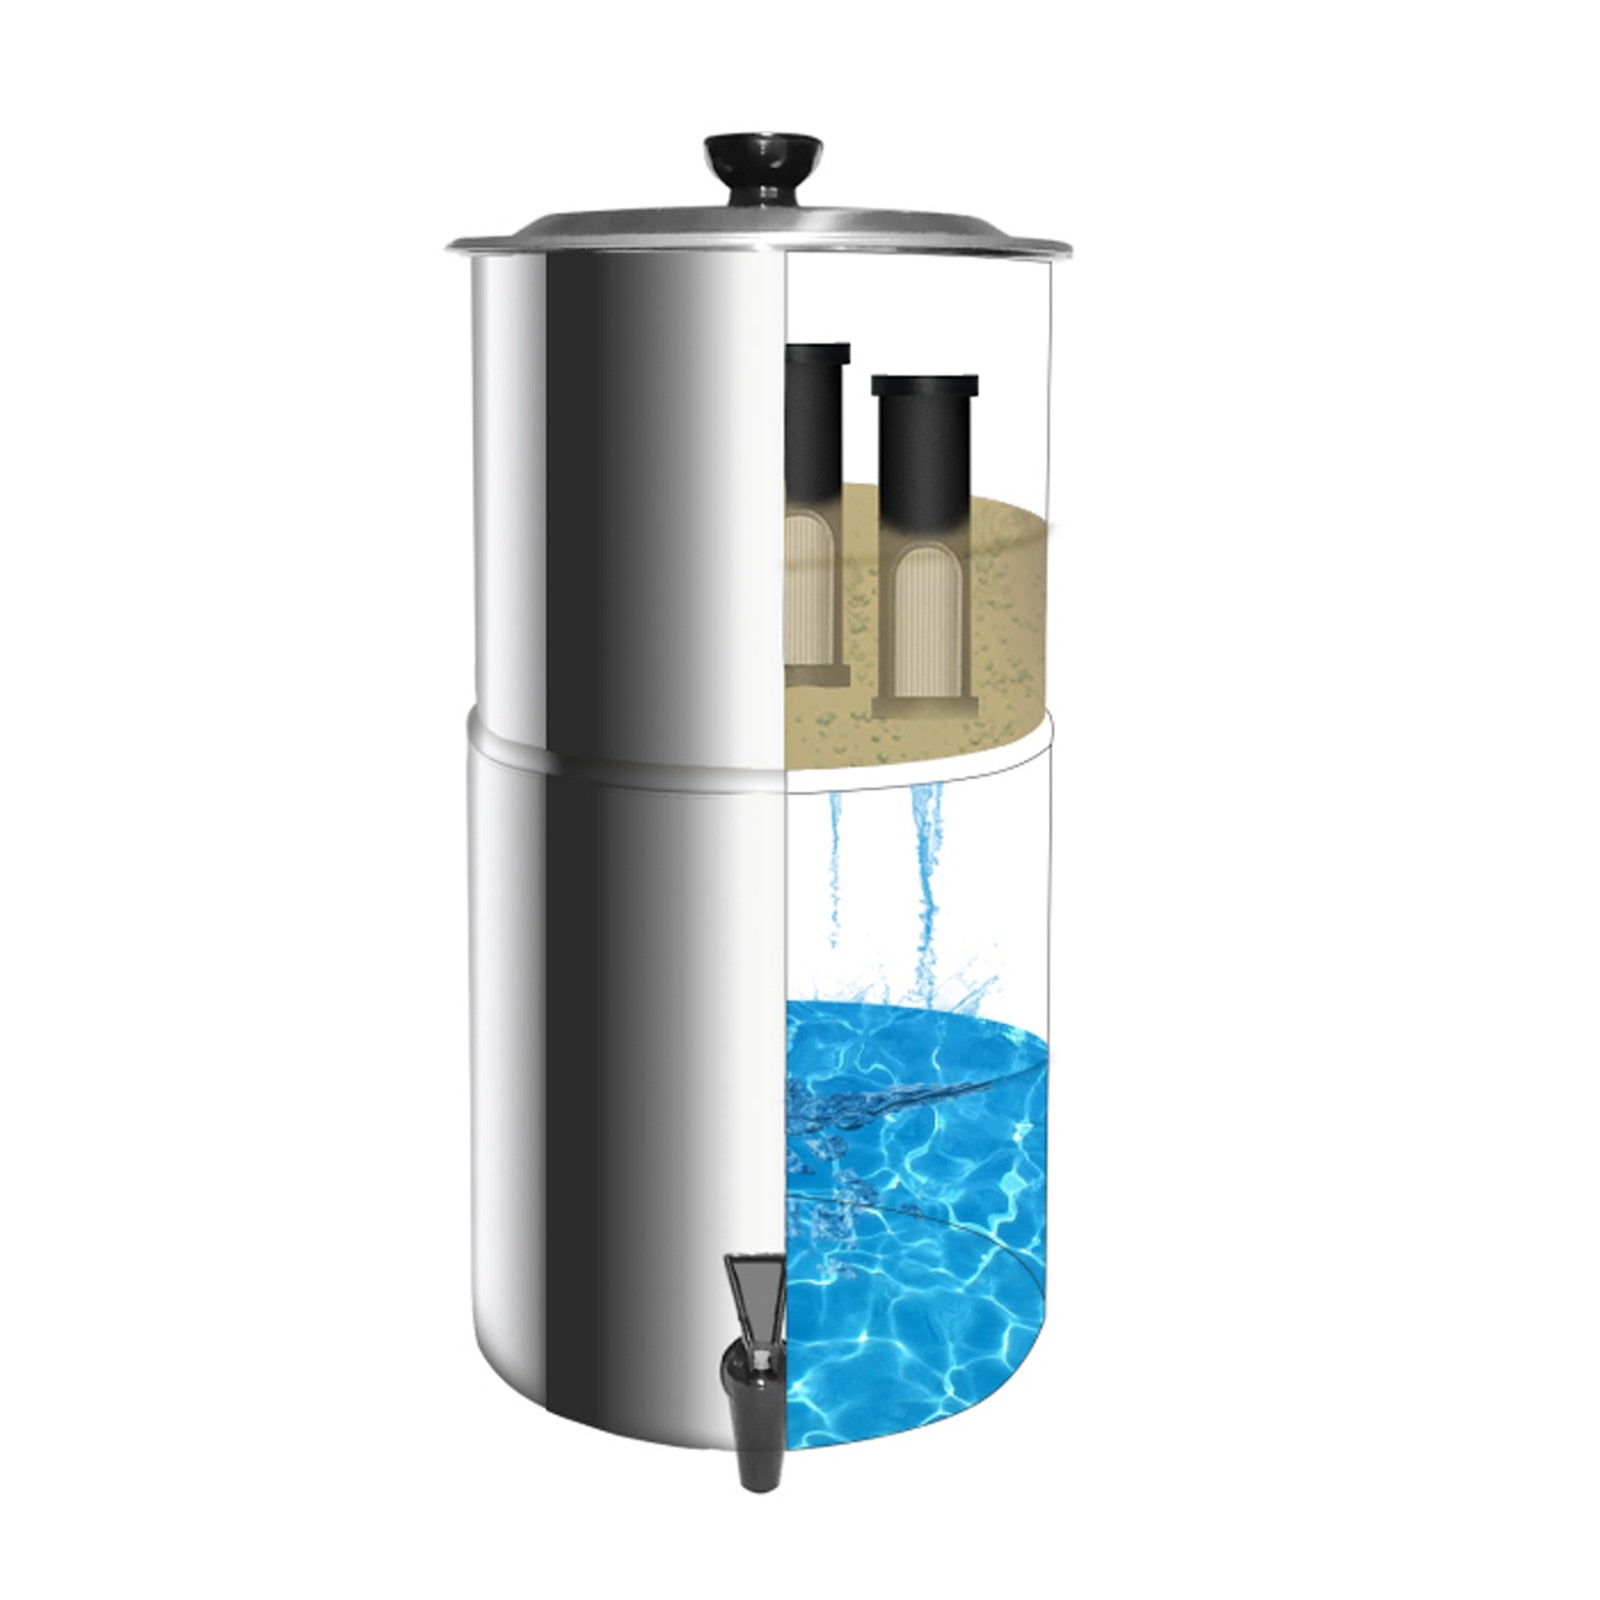 This water filter system with a removable filter can help effectively remove the bacteria to provide clean, safe water. It is perfect for outdoor emergency, camping, hiking, backpacking, etc.